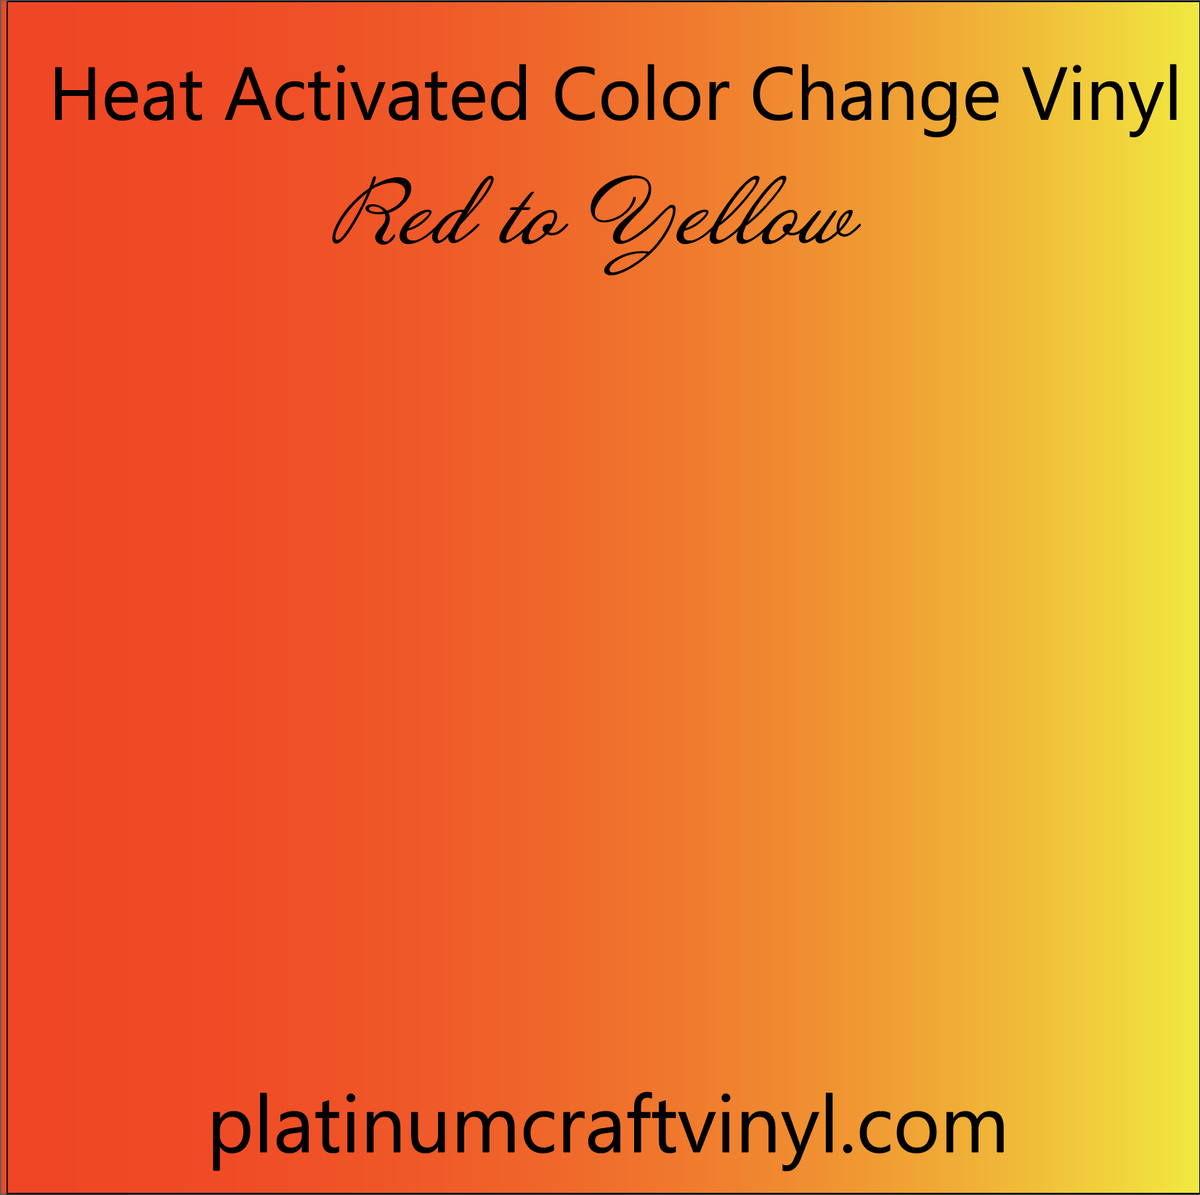 Cold Color Changing Vinyl Permanent Adhesive Vinyl - 8 Sheets 12